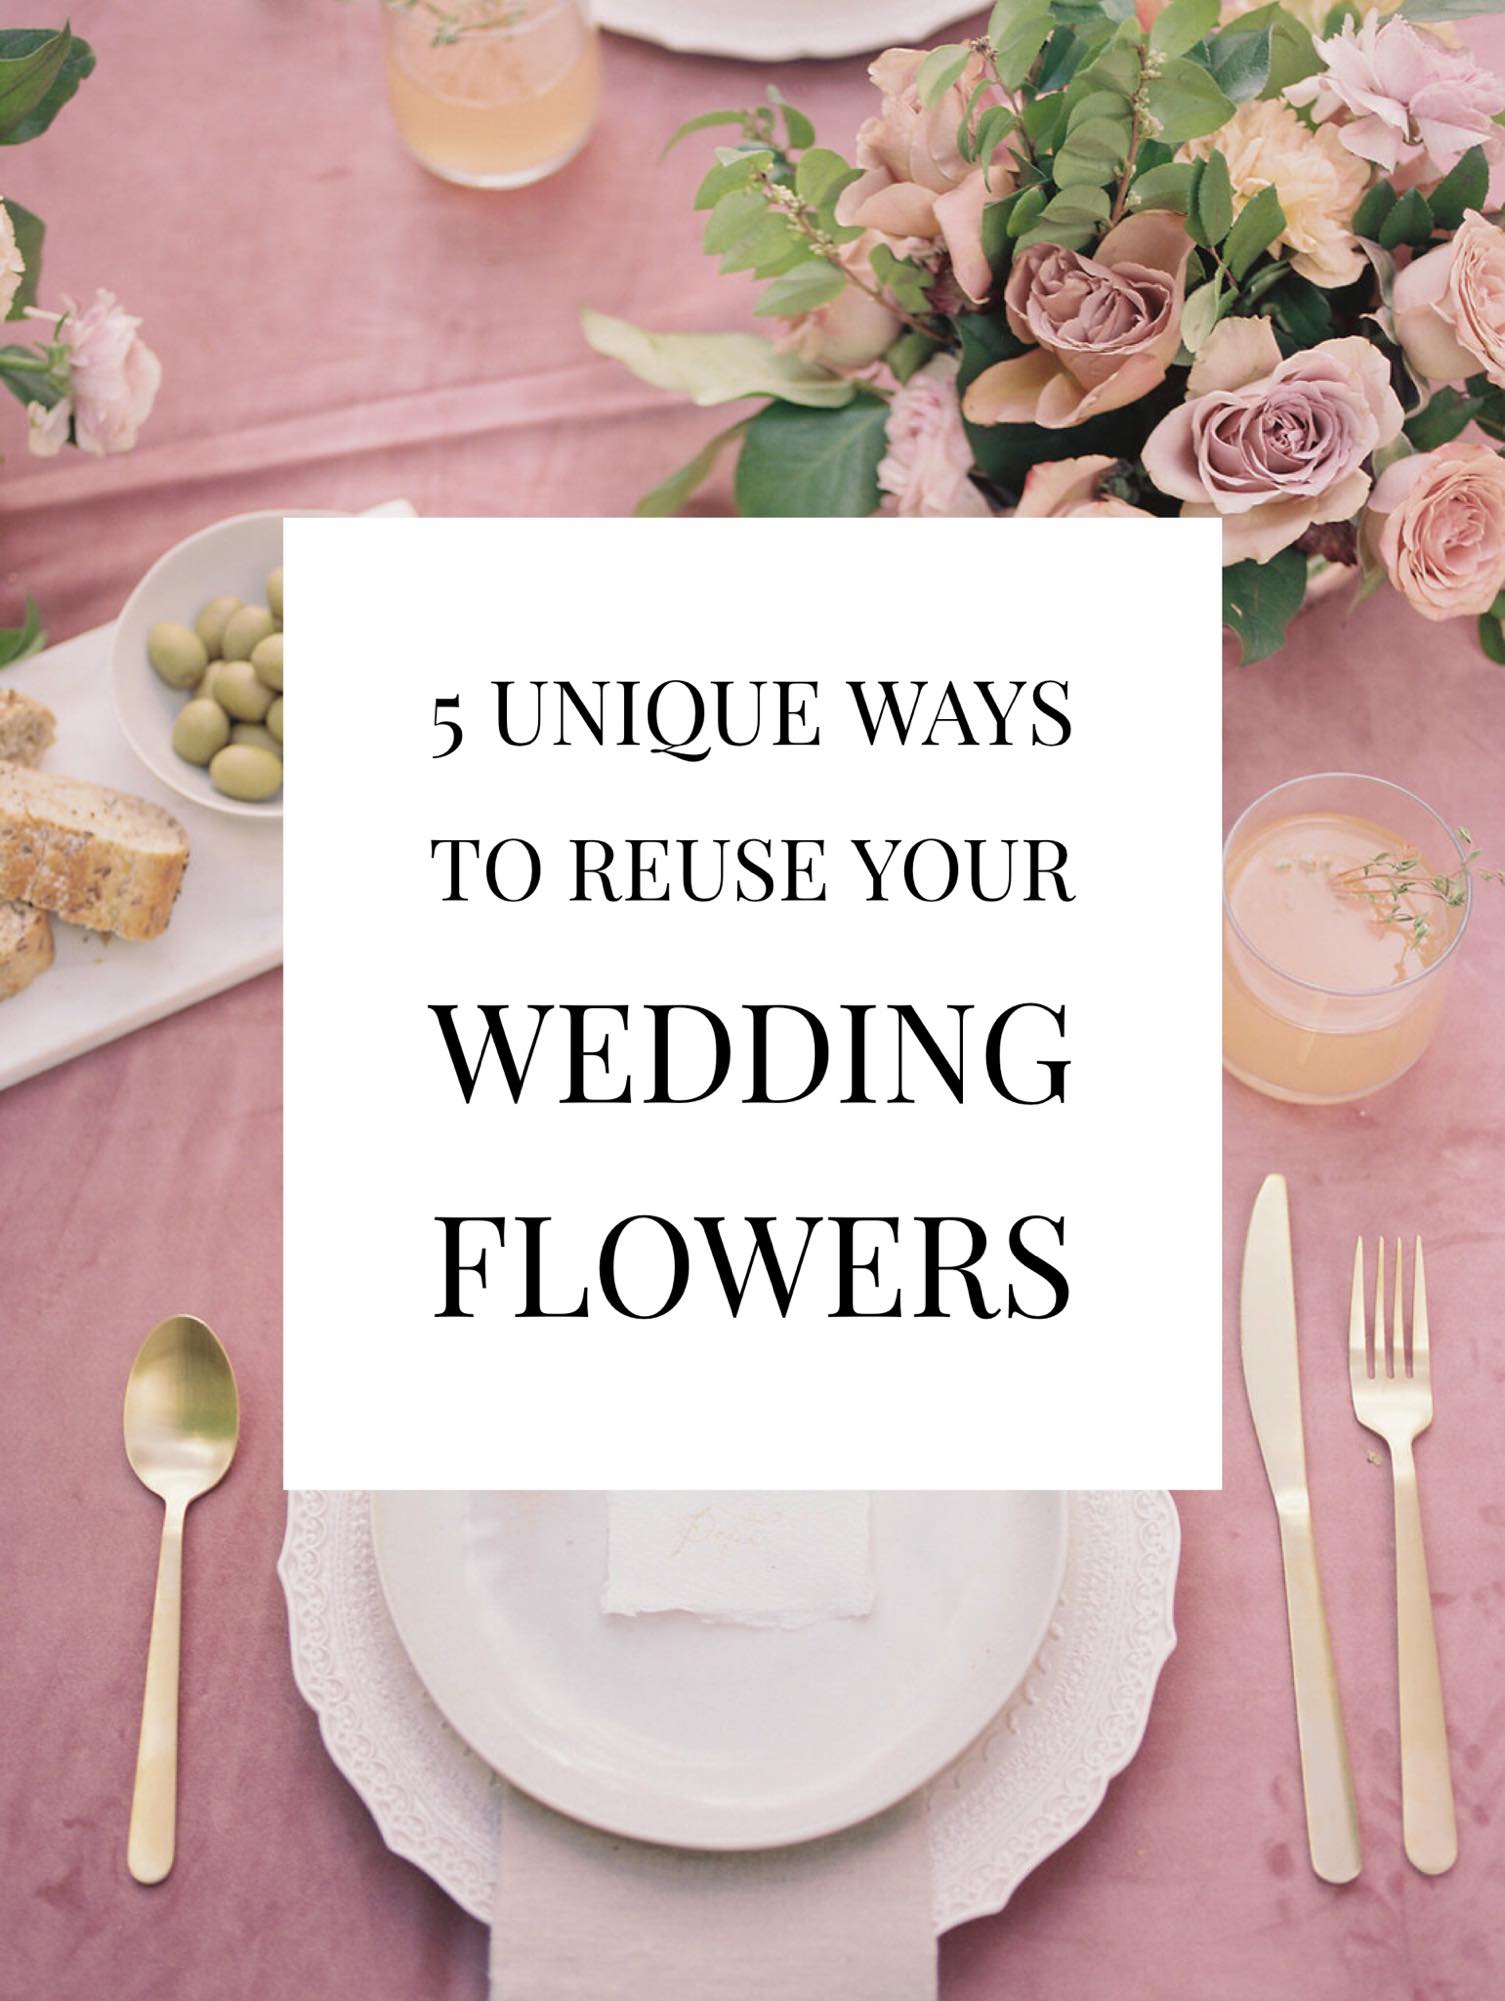 5 Unique Ways to Reuse Your Wedding Flowers